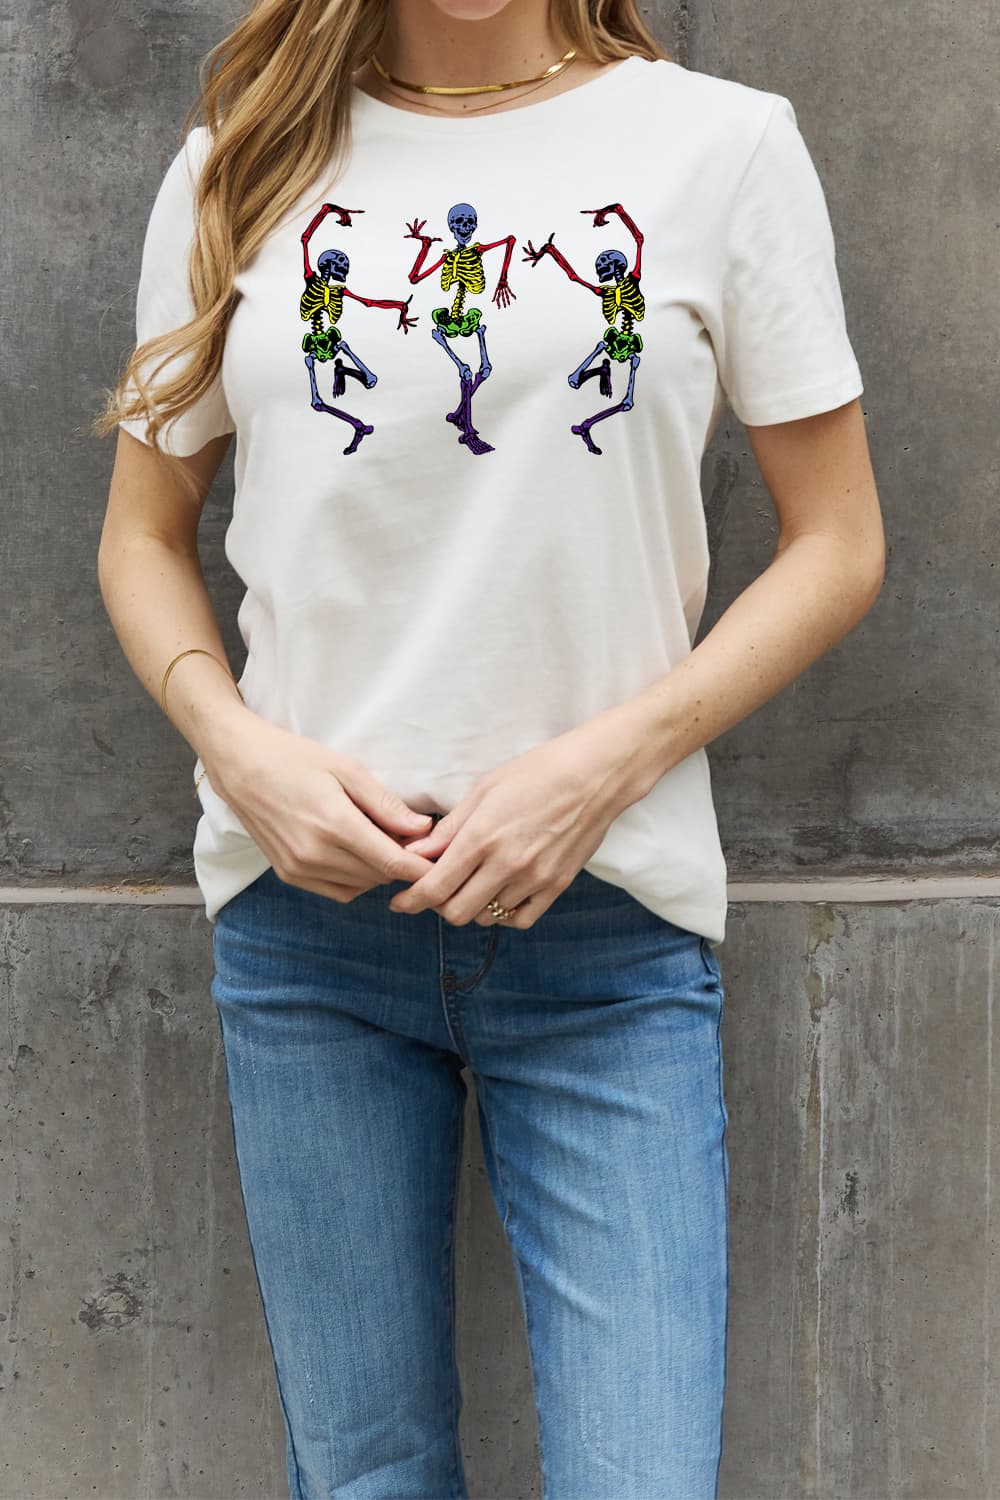 Simply Love Dancing Skeleton Graphic Cotton Tee